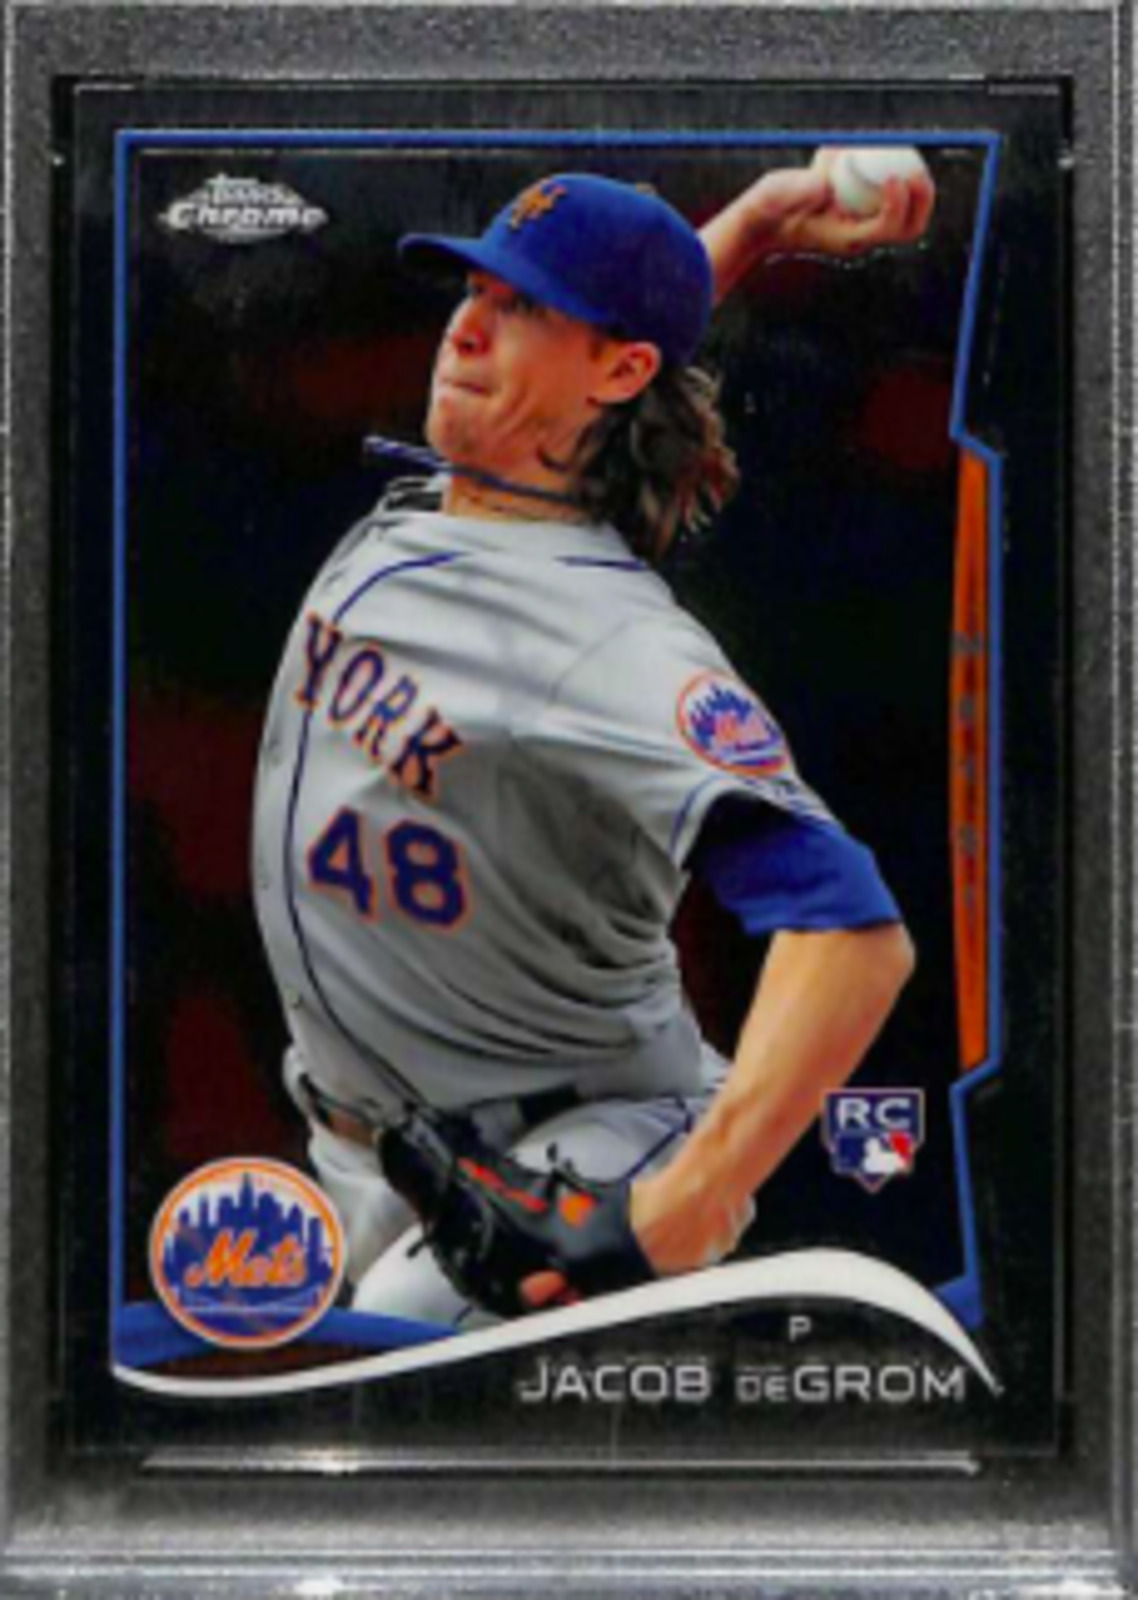 2014 Topps Chrome Update Jacob deGrom rookie card